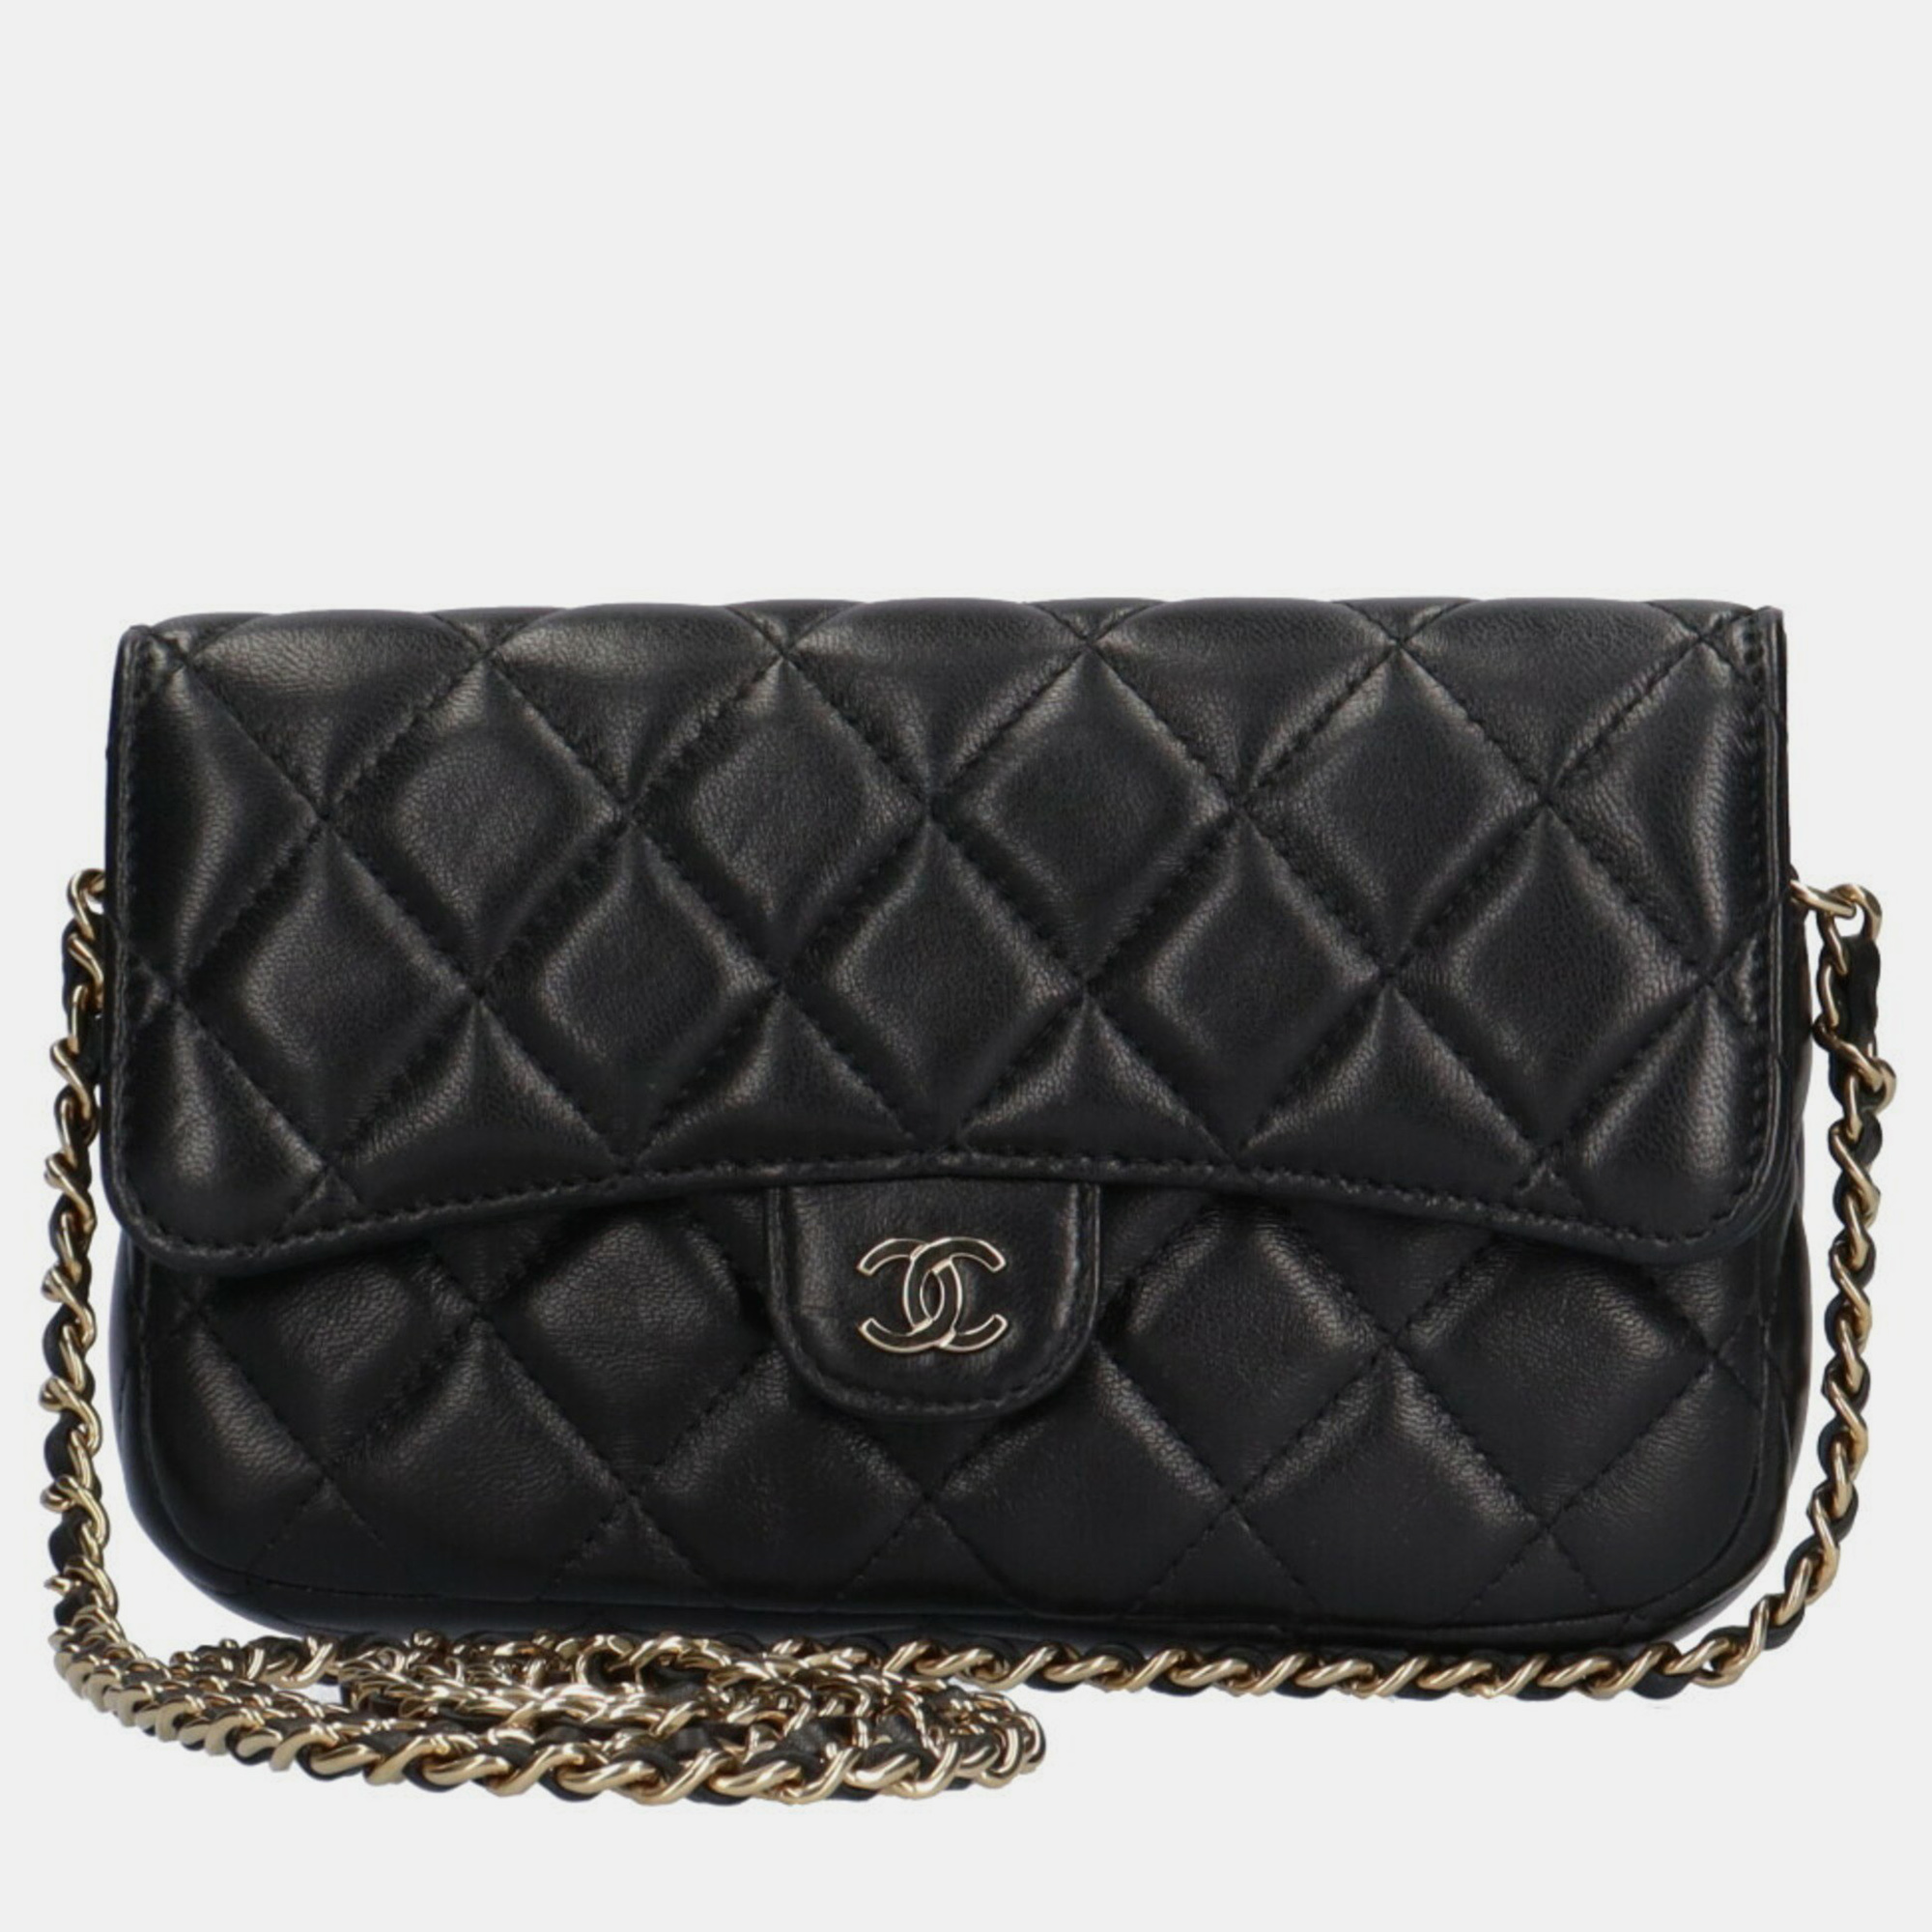 Chanel black caviar quilted flap phone holder with chain